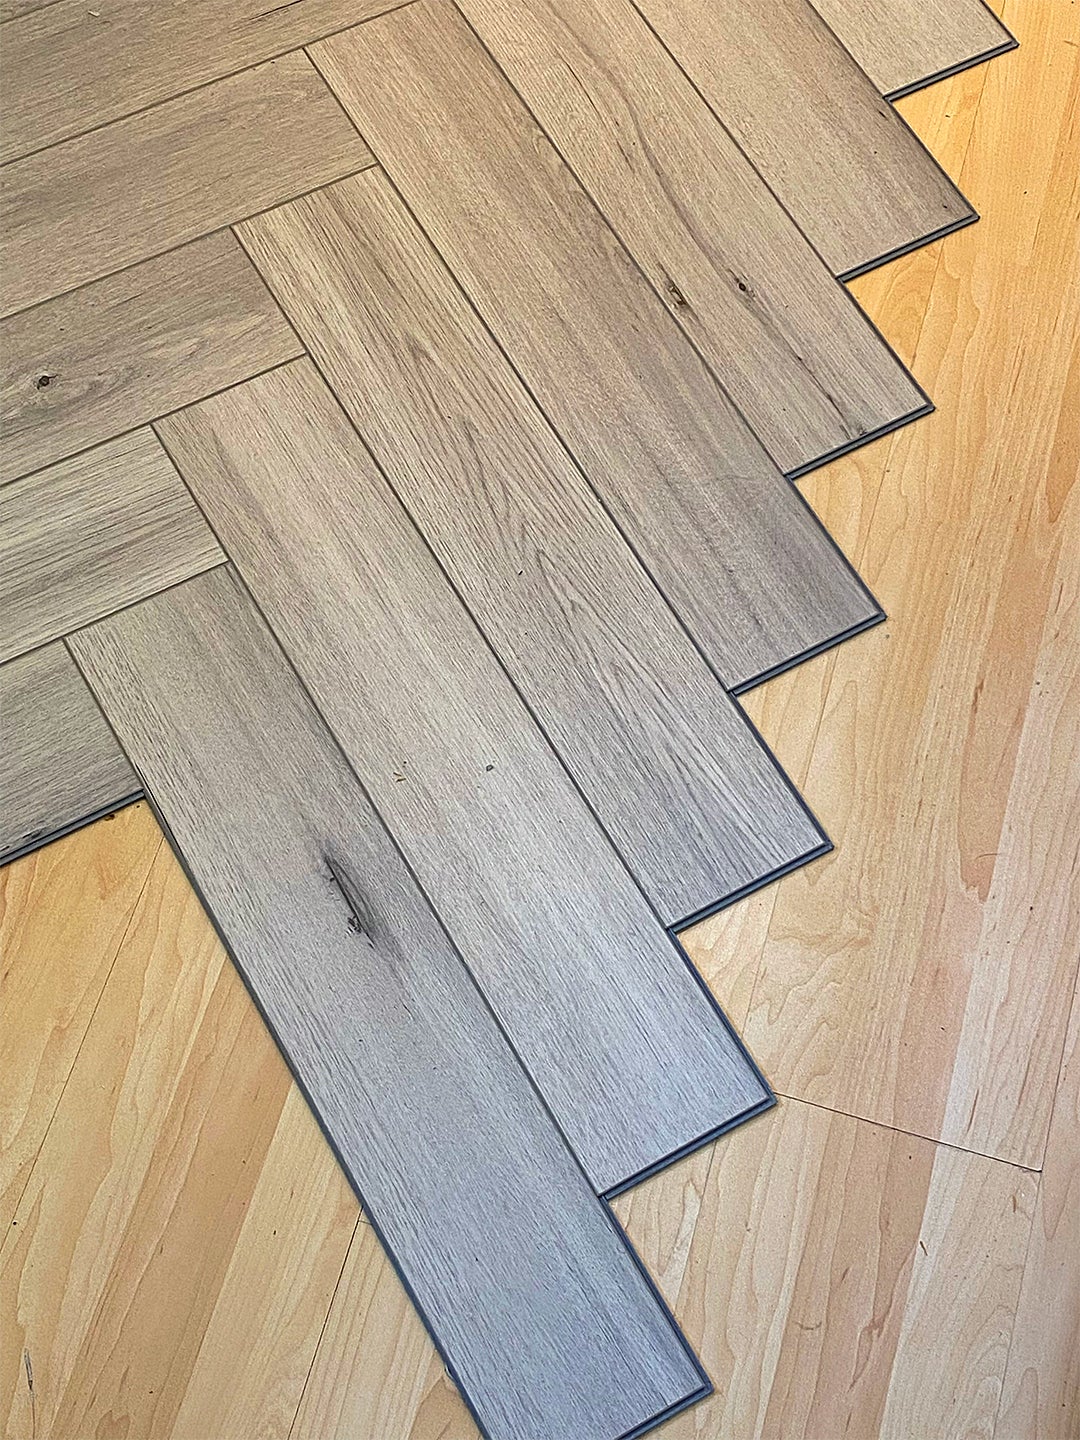 floor tiels laid out in pattern